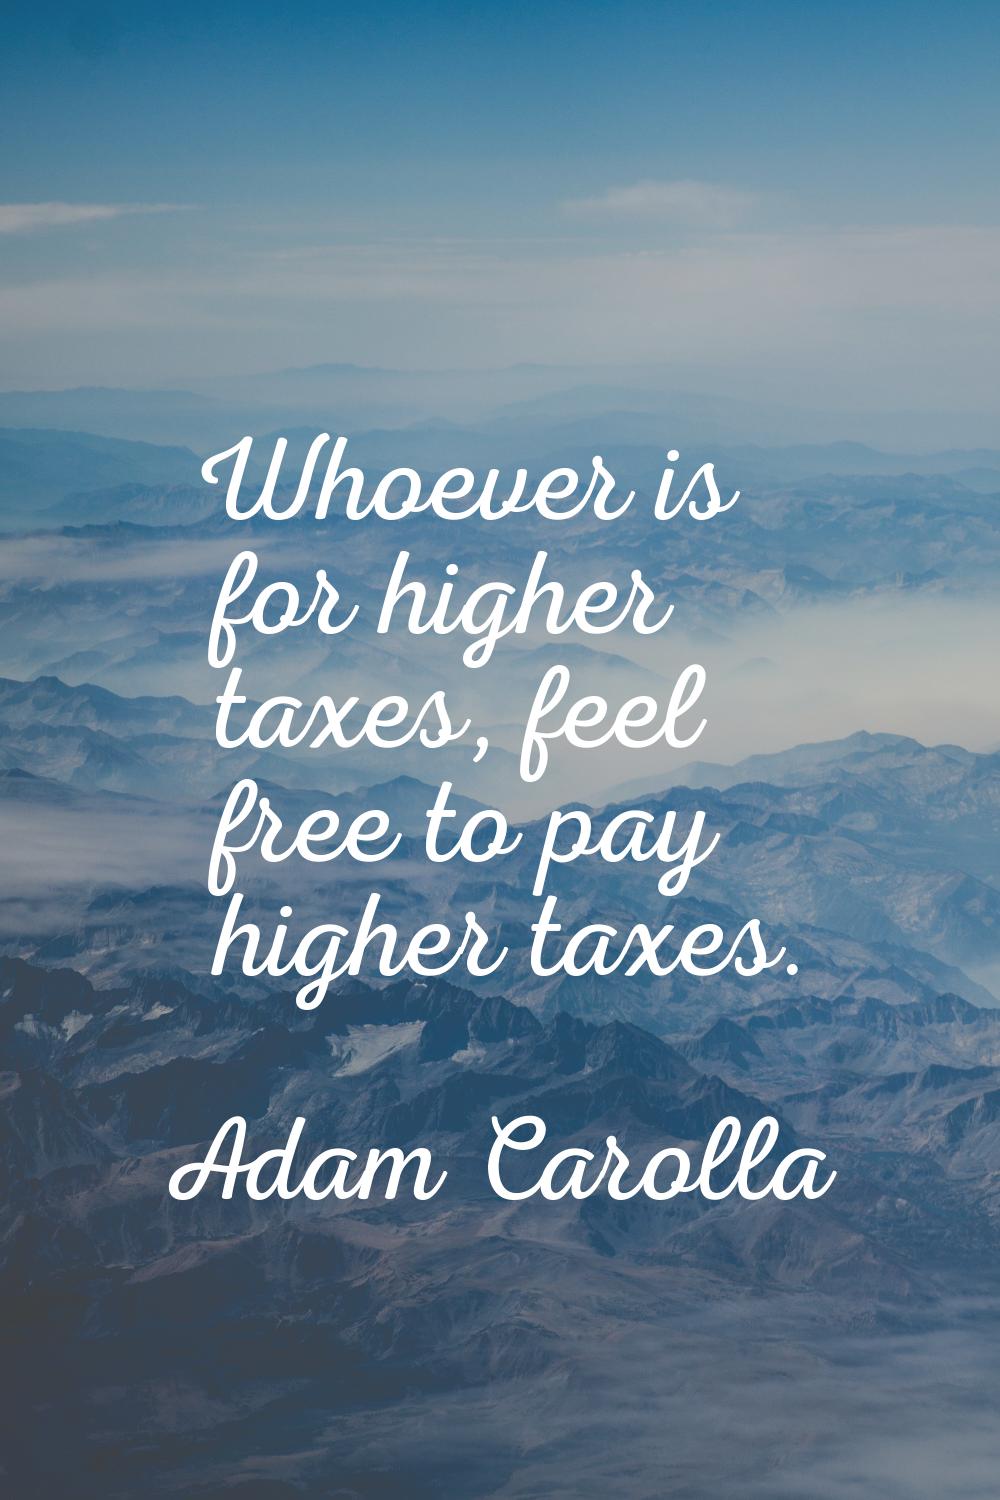 Whoever is for higher taxes, feel free to pay higher taxes.